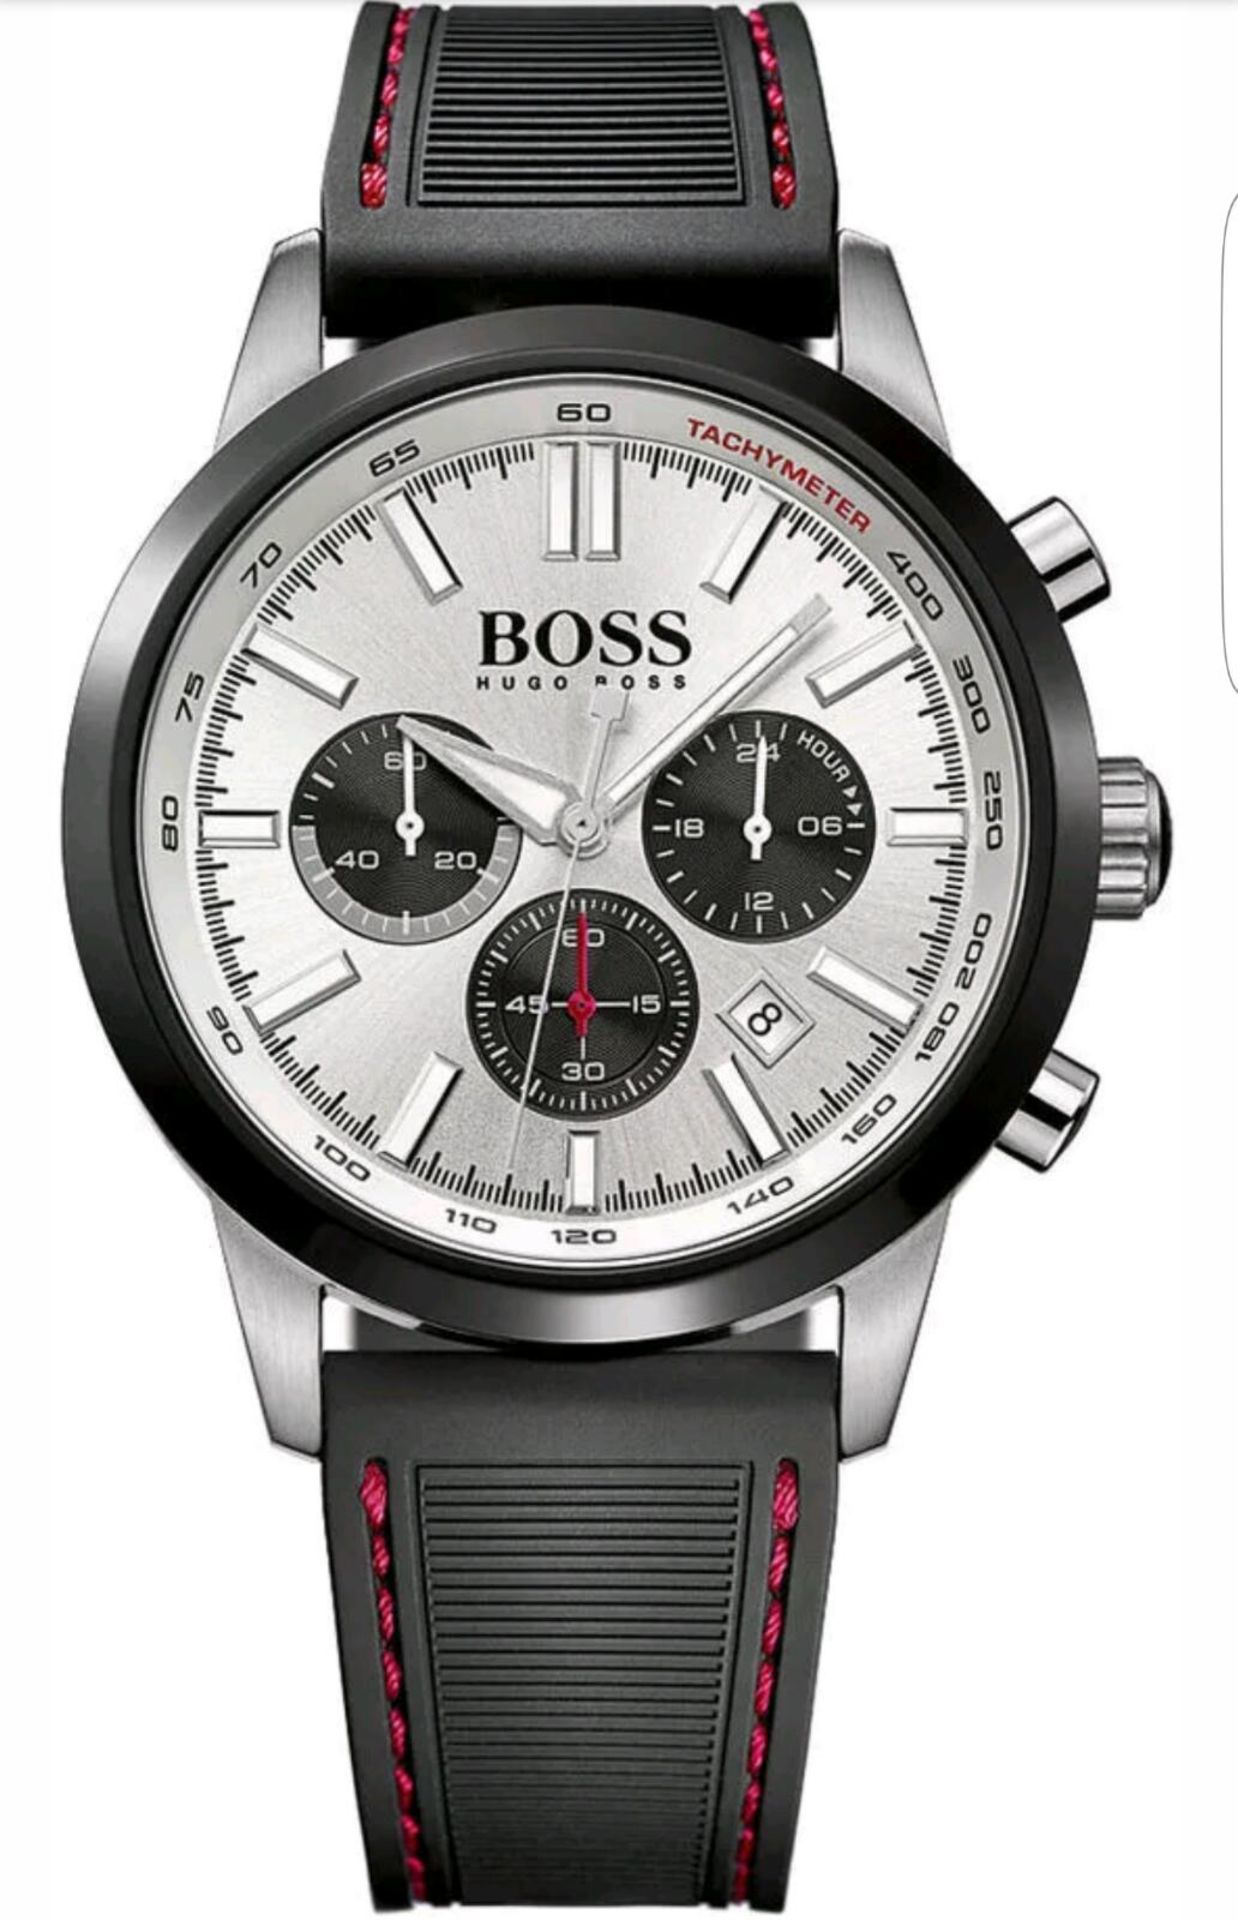 BRAND NEW GENTS HUGO BOSS WATCH 1513185, COMPLETE WITH ORIGINAL BOX AND MANUAL